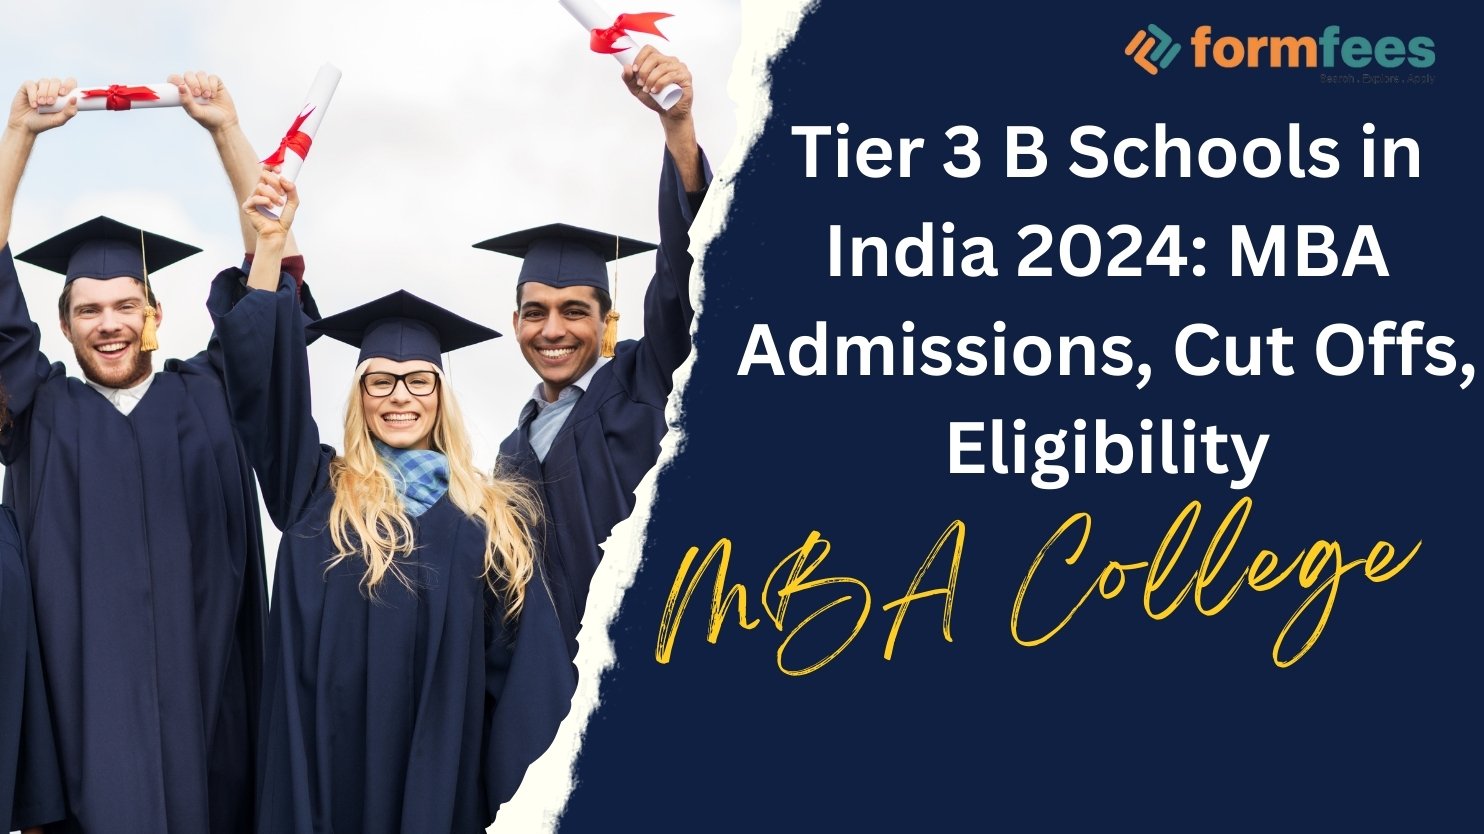 Tier 3 B Schools in India 2024 MBA Admissions, Cut Offs, Eligibility